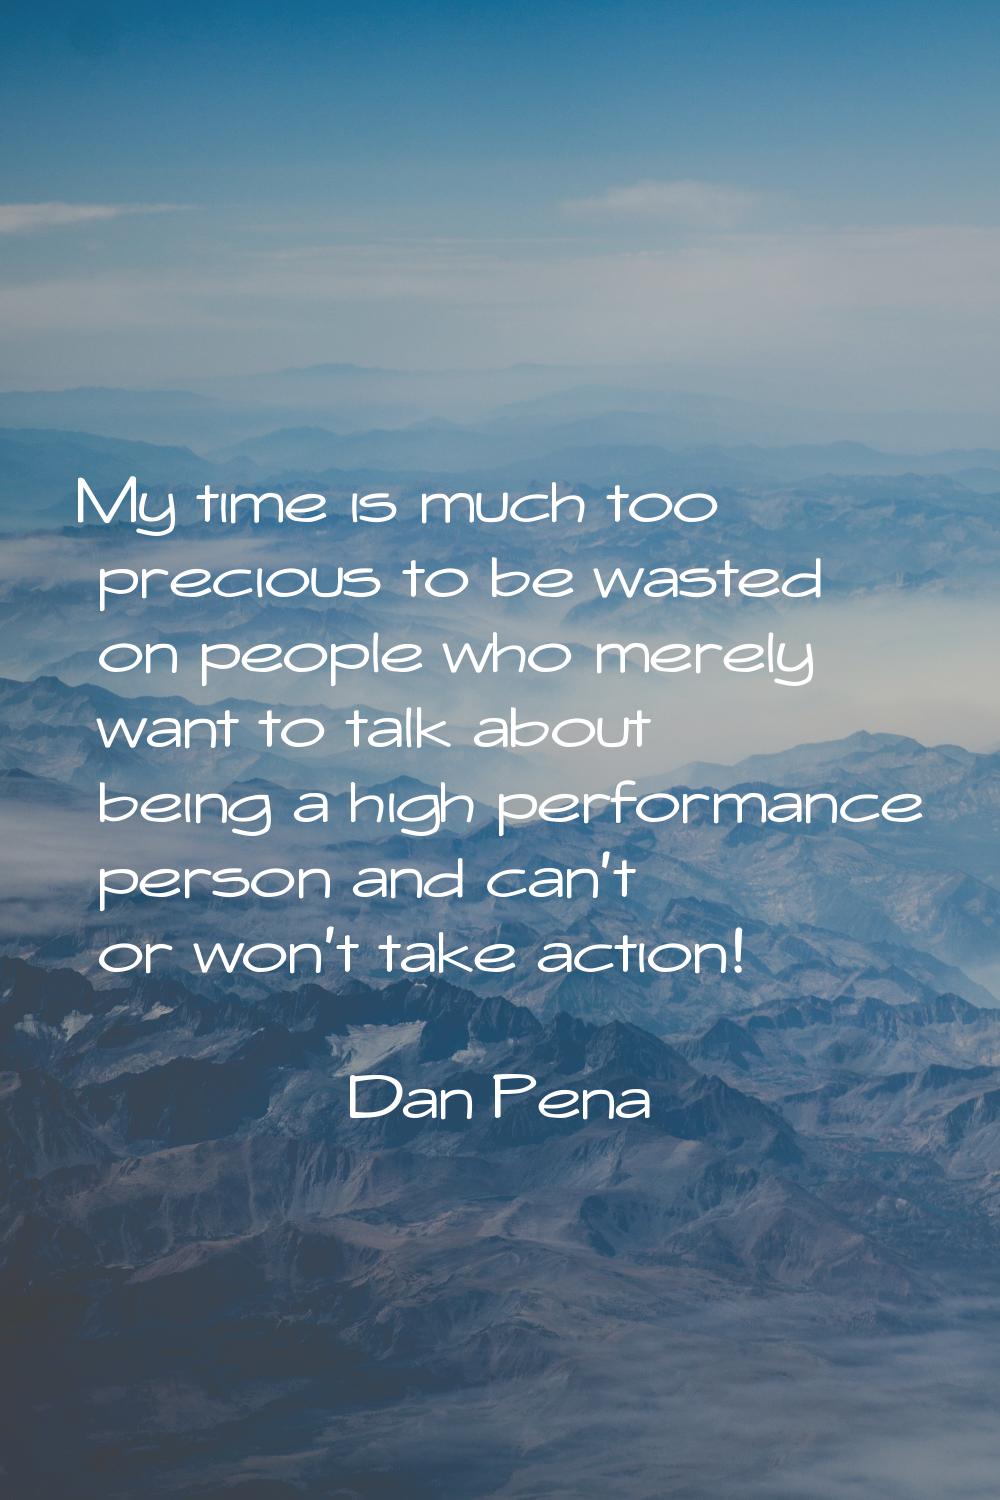 My time is much too precious to be wasted on people who merely want to talk about being a high perf